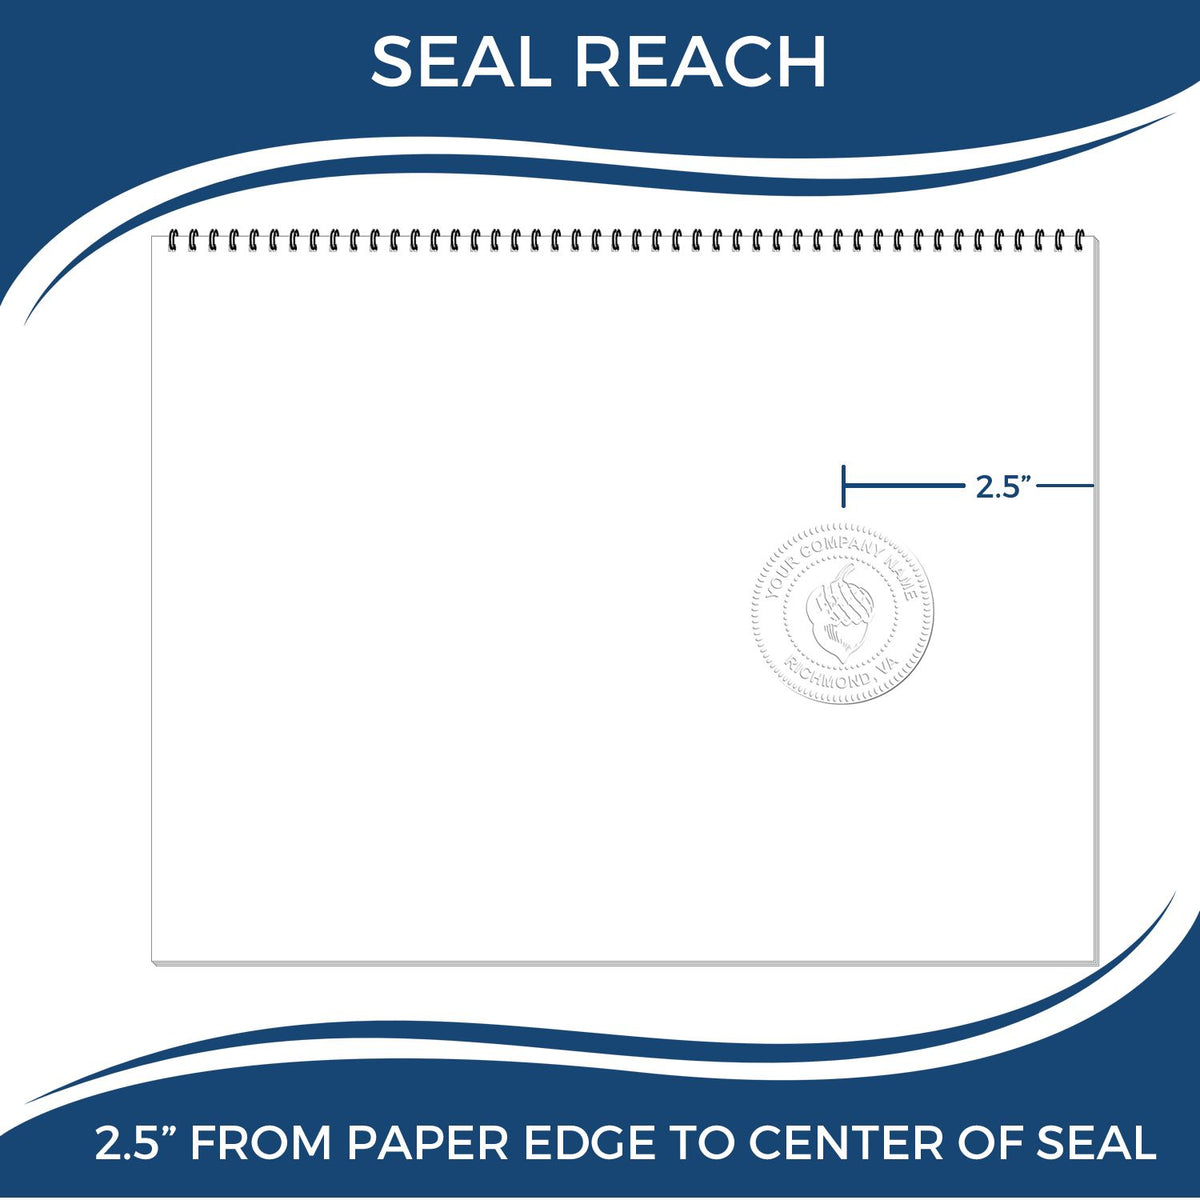 An infographic showing the seal reach which is represented by a ruler and a miniature seal image of the Long Reach Massachusetts PE Seal